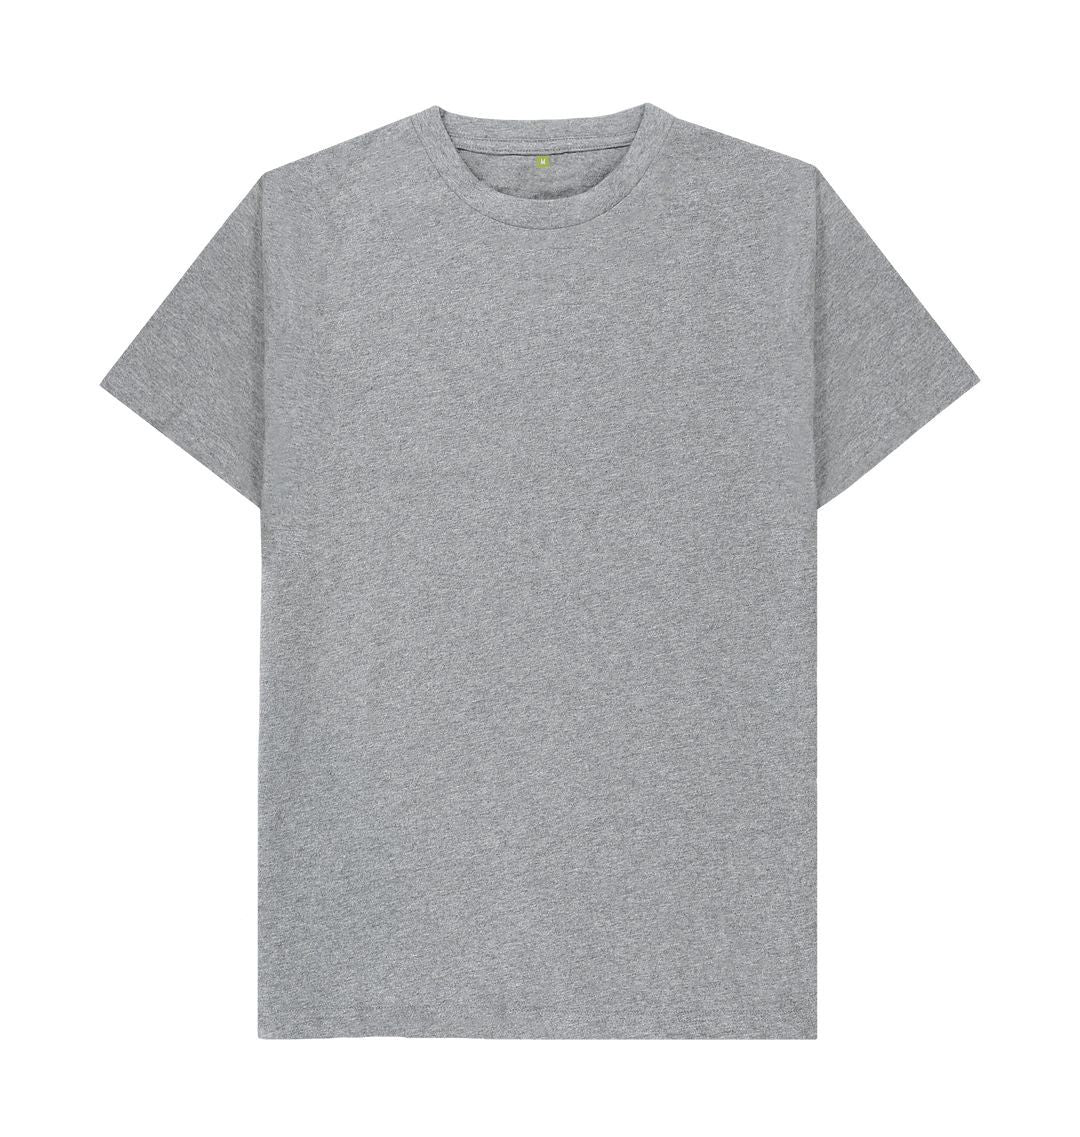 Athletic Grey Simple Stuff fitted tee